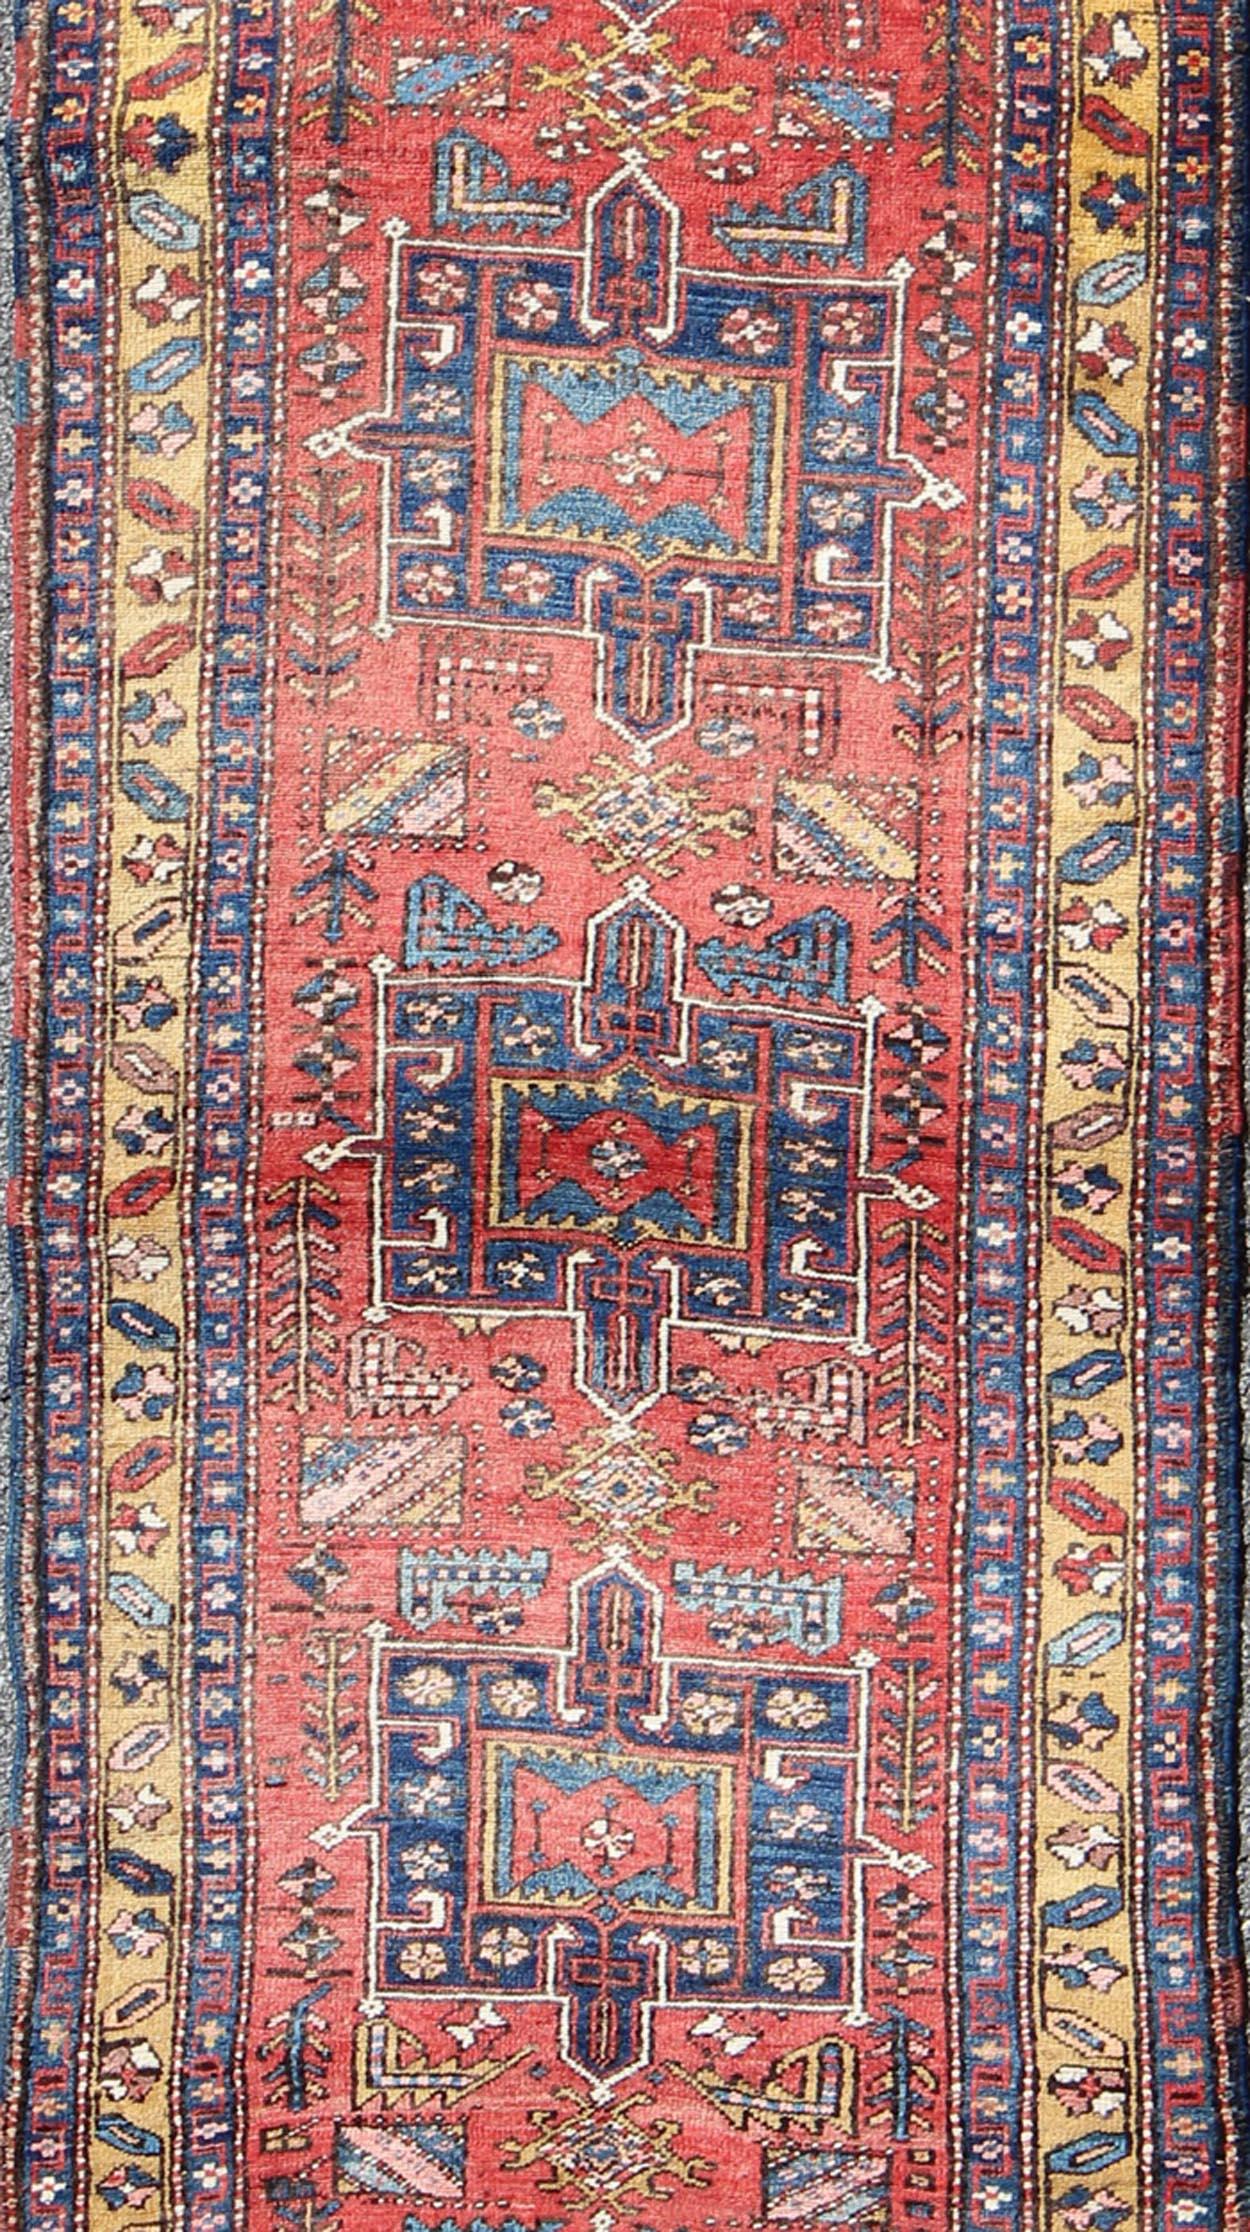 Hand-Knotted Persian Heriz Semi Antique Runner in Soft Red, Blue and Yellow Colors